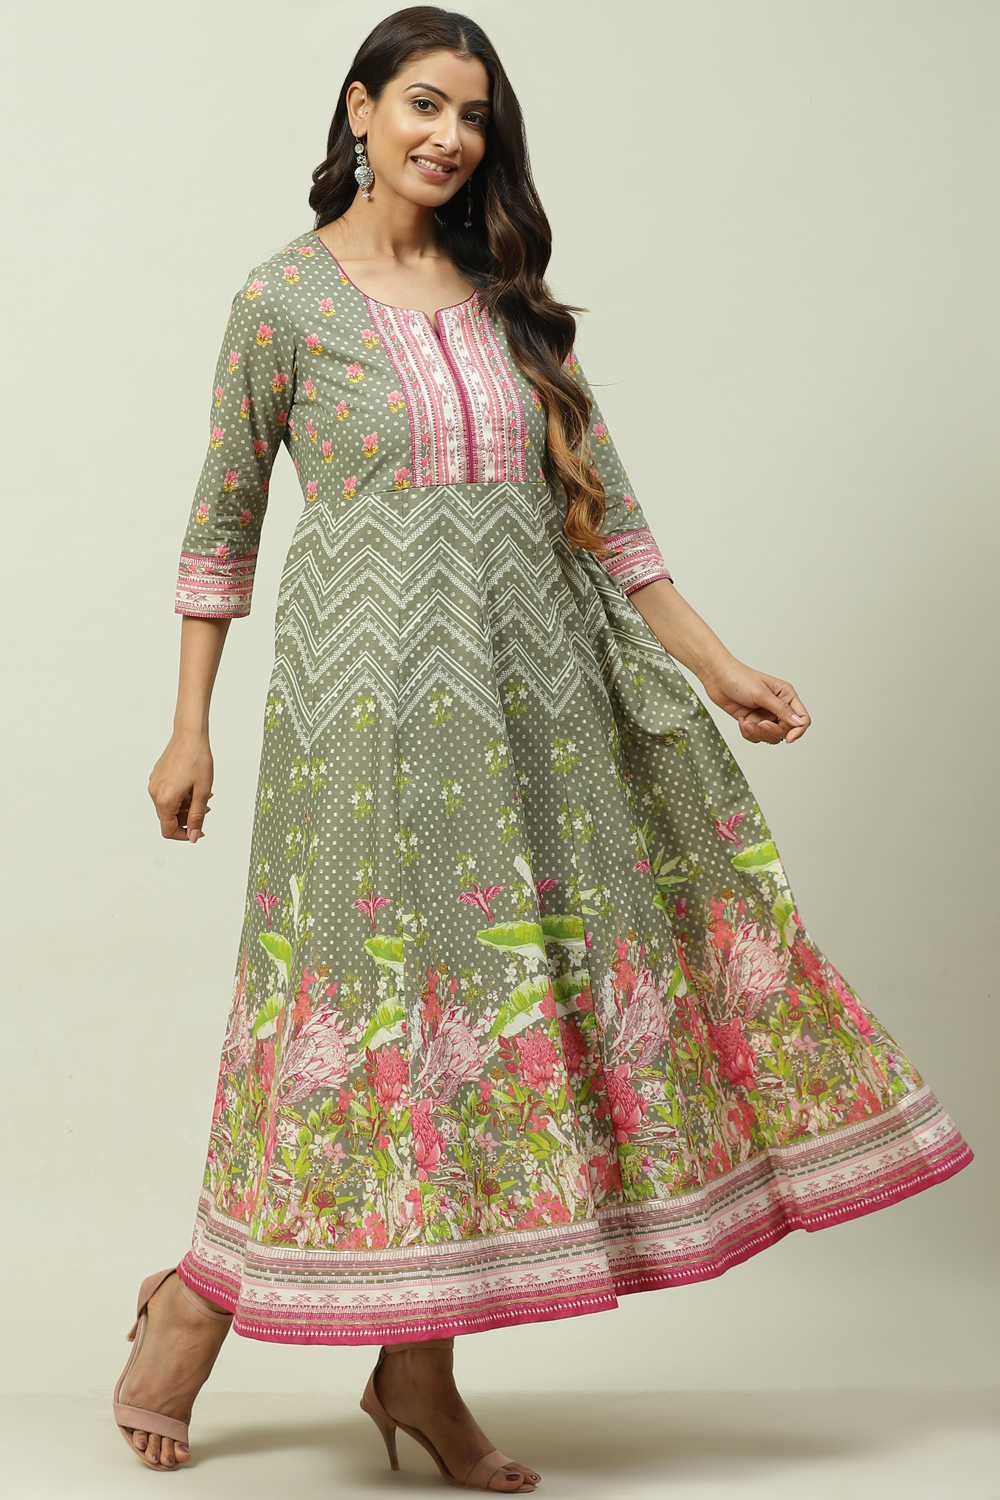 Buy Olive Green Cotton Flared Printed Dress () for INR1999.50 | Biba India